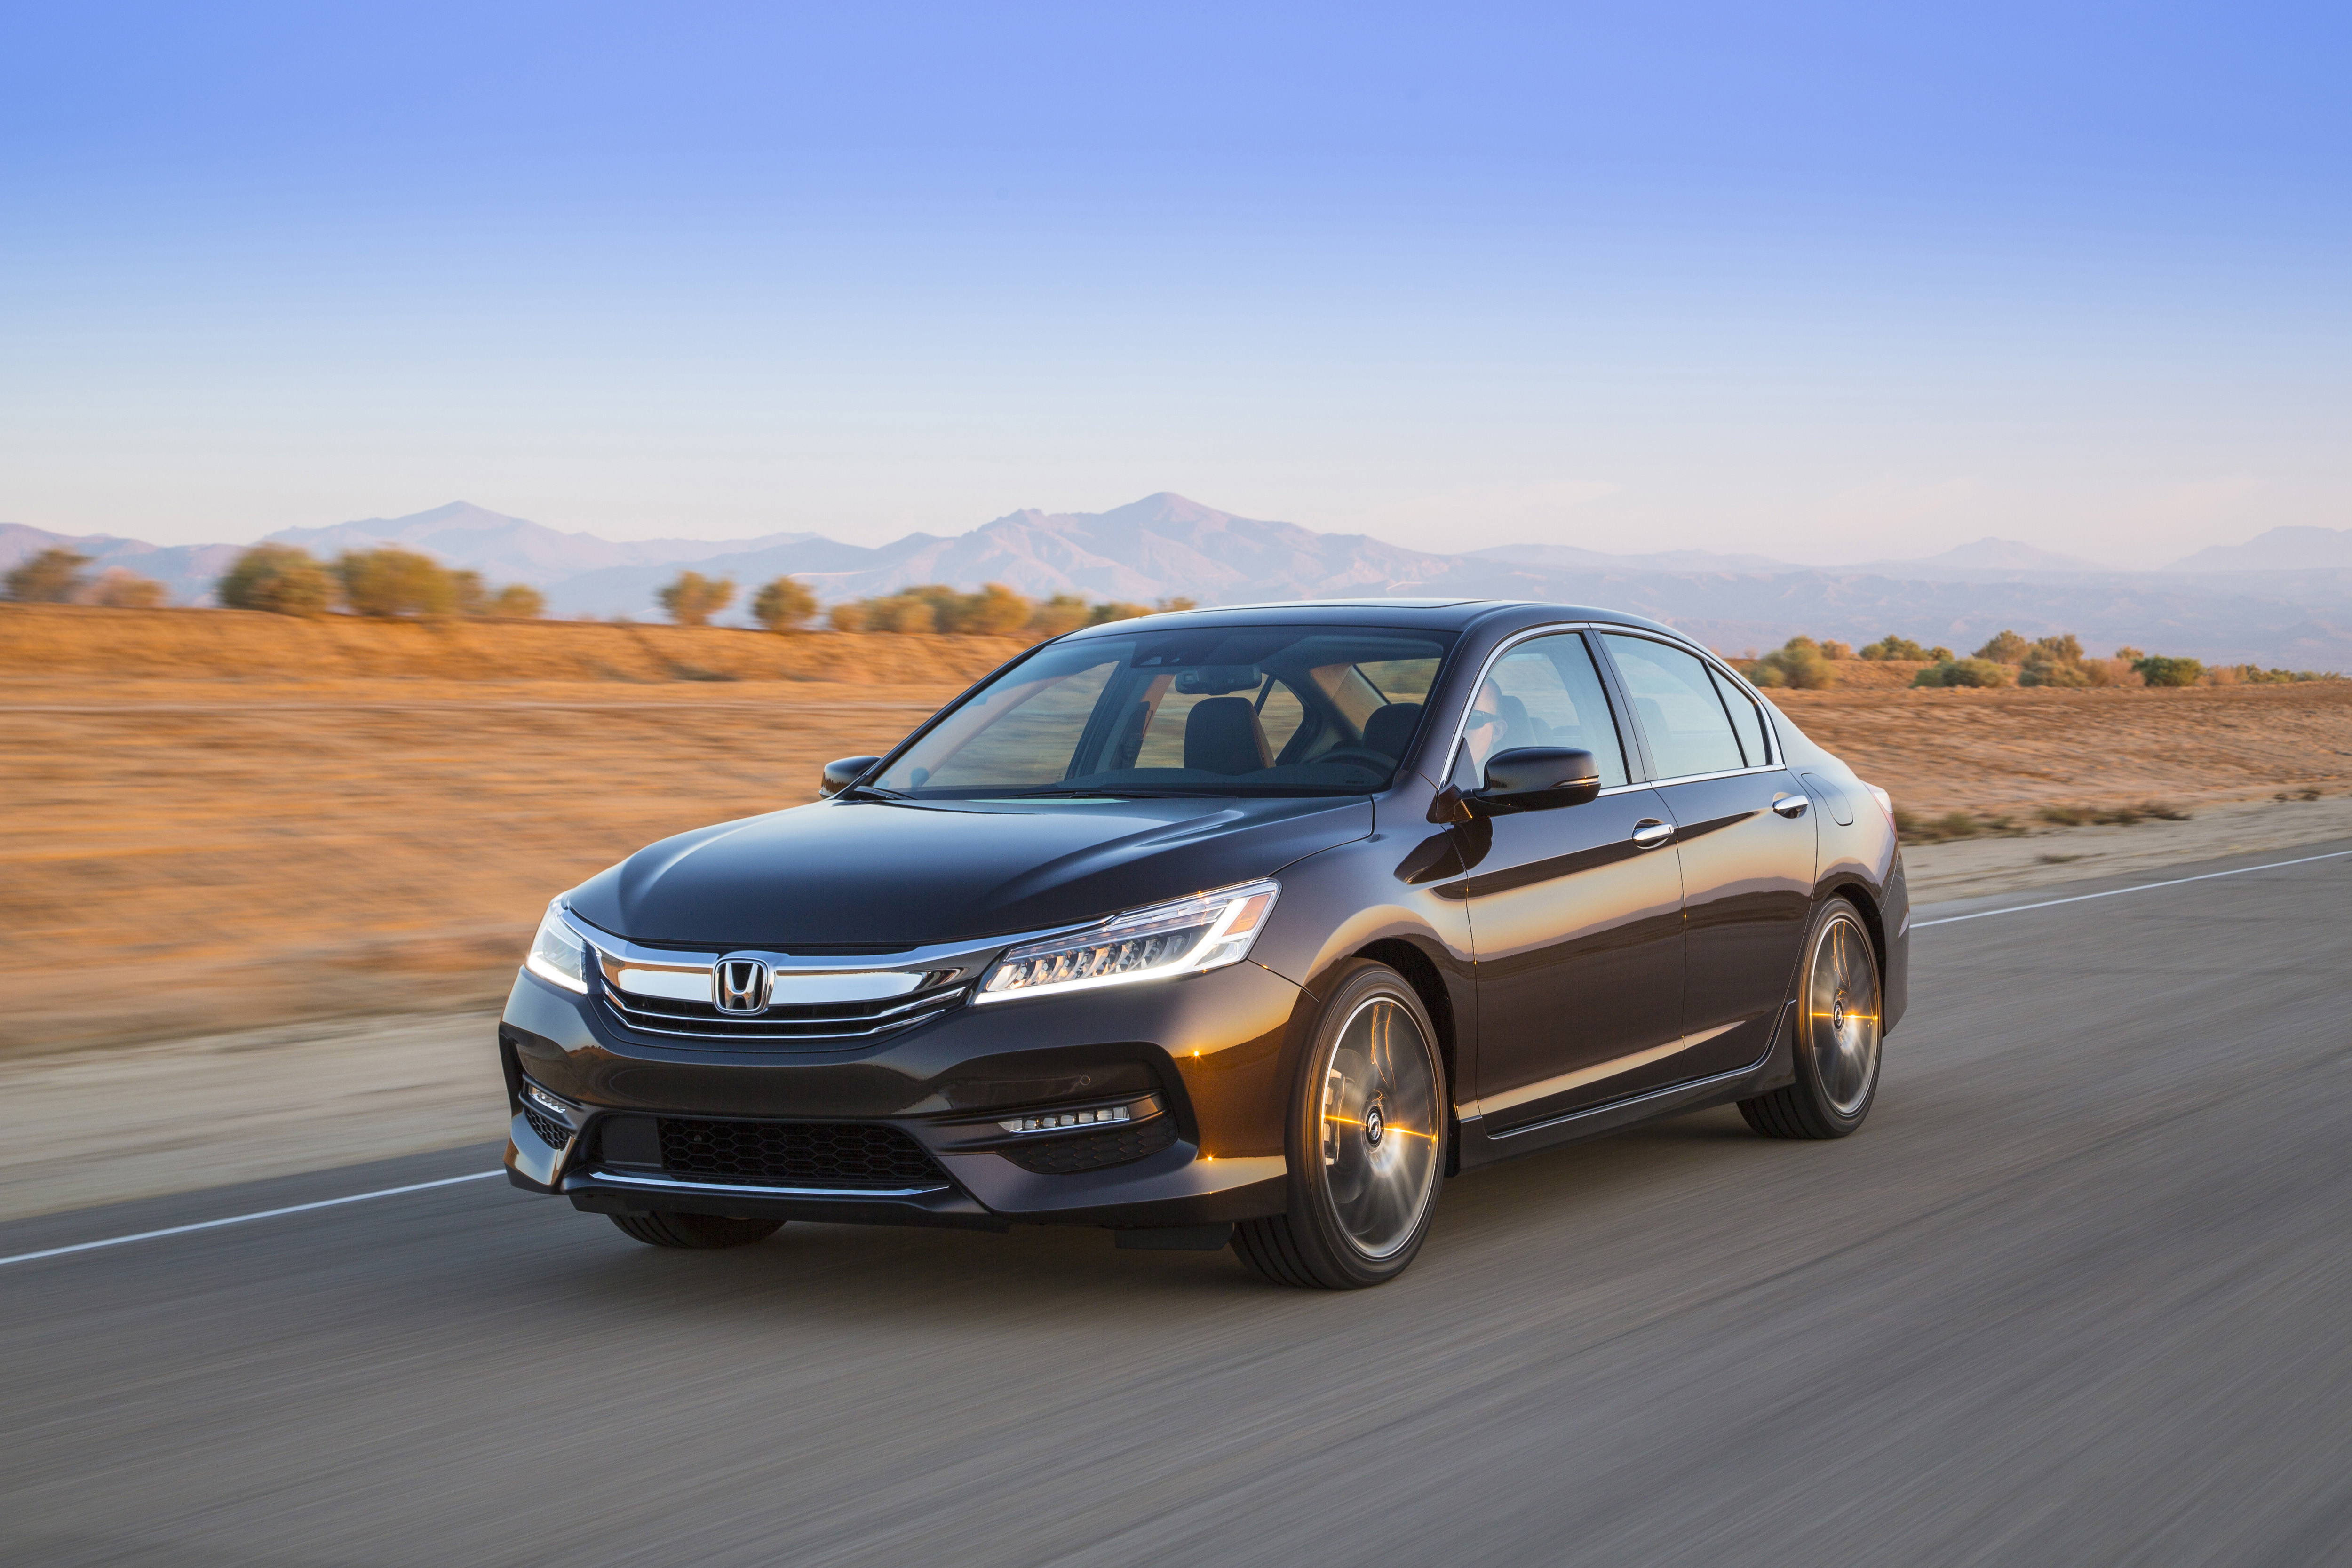 2016 Honda Accord facelift sedan and coupe models fully revealed in